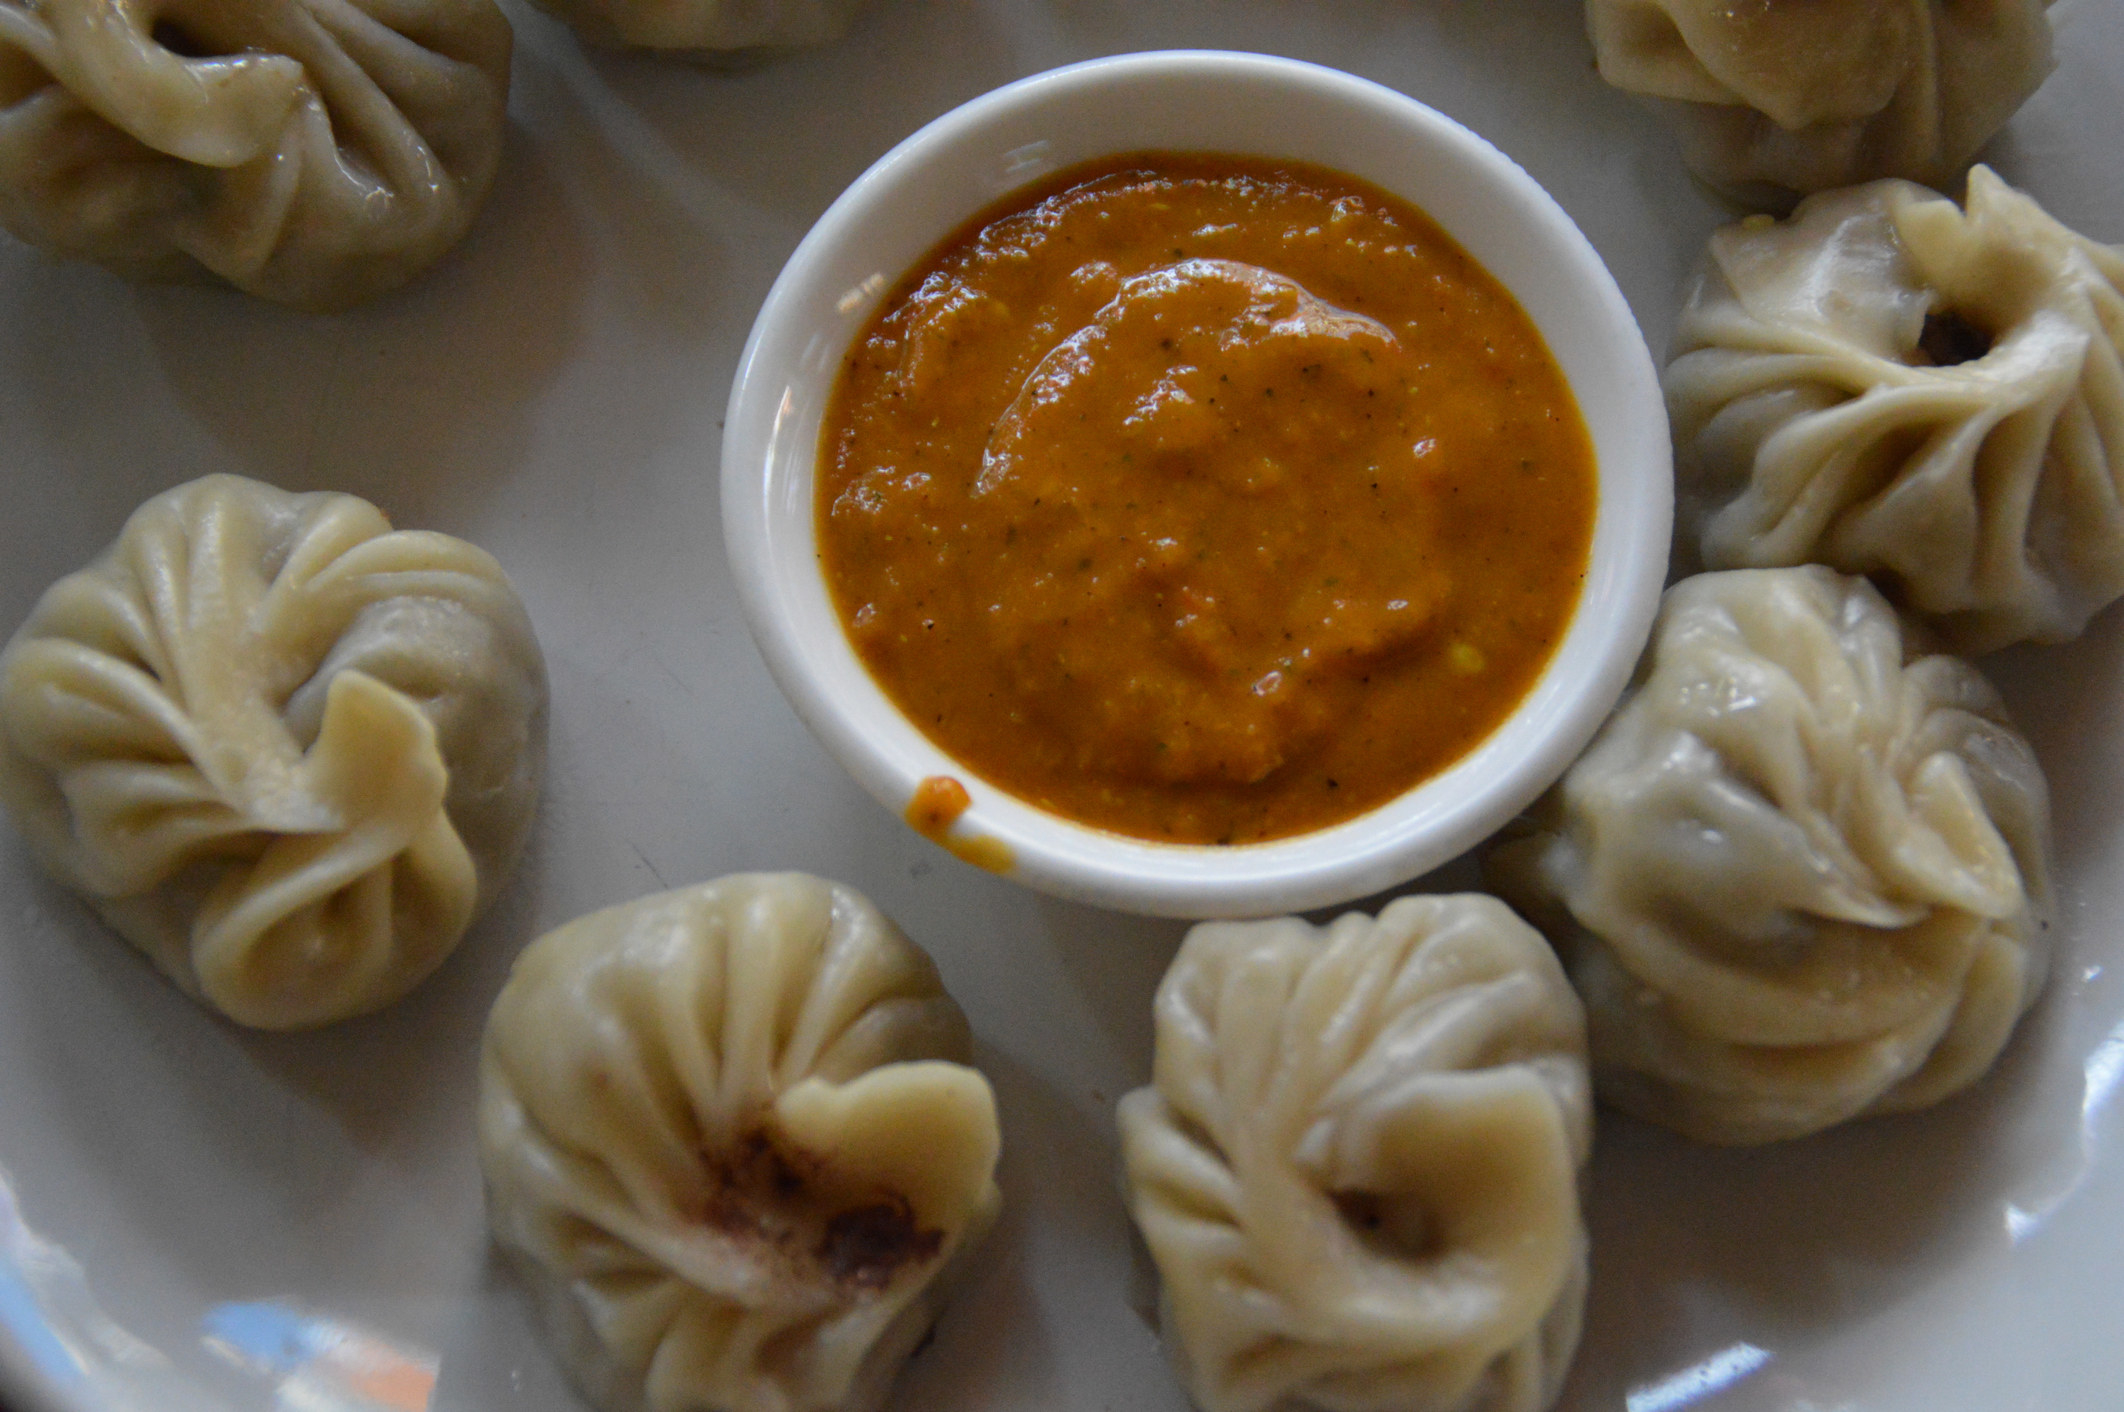 Nepali steamed dumplings with dipping sauce